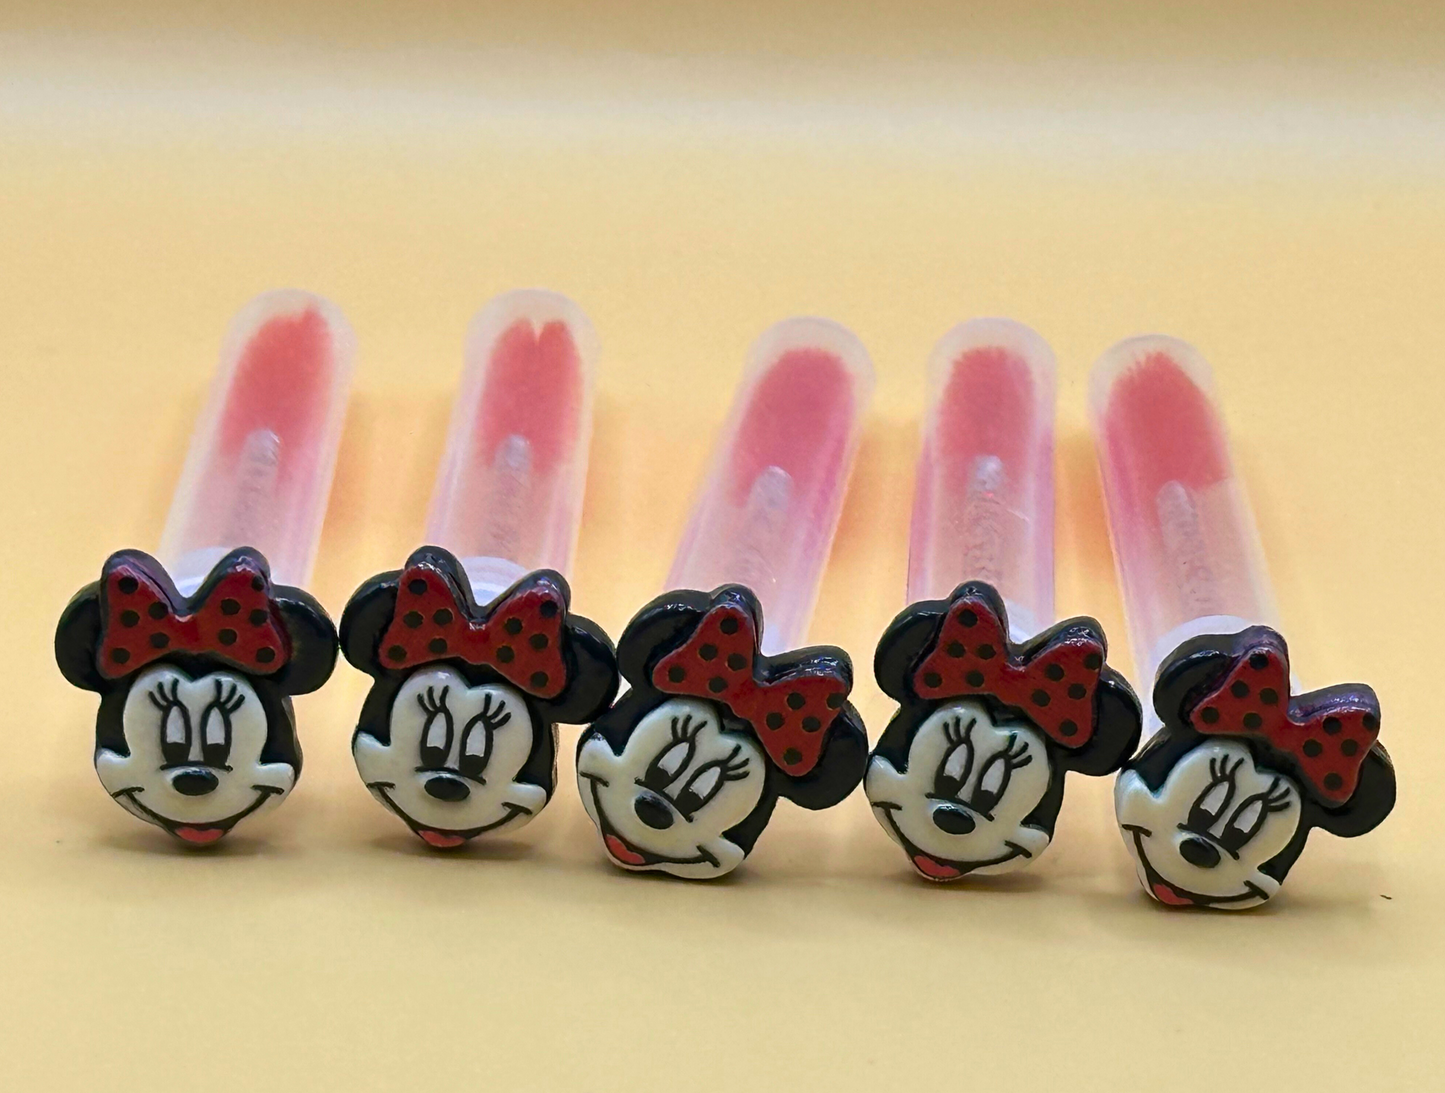 Regular Eyelash Wands with Cover - M. Mouse